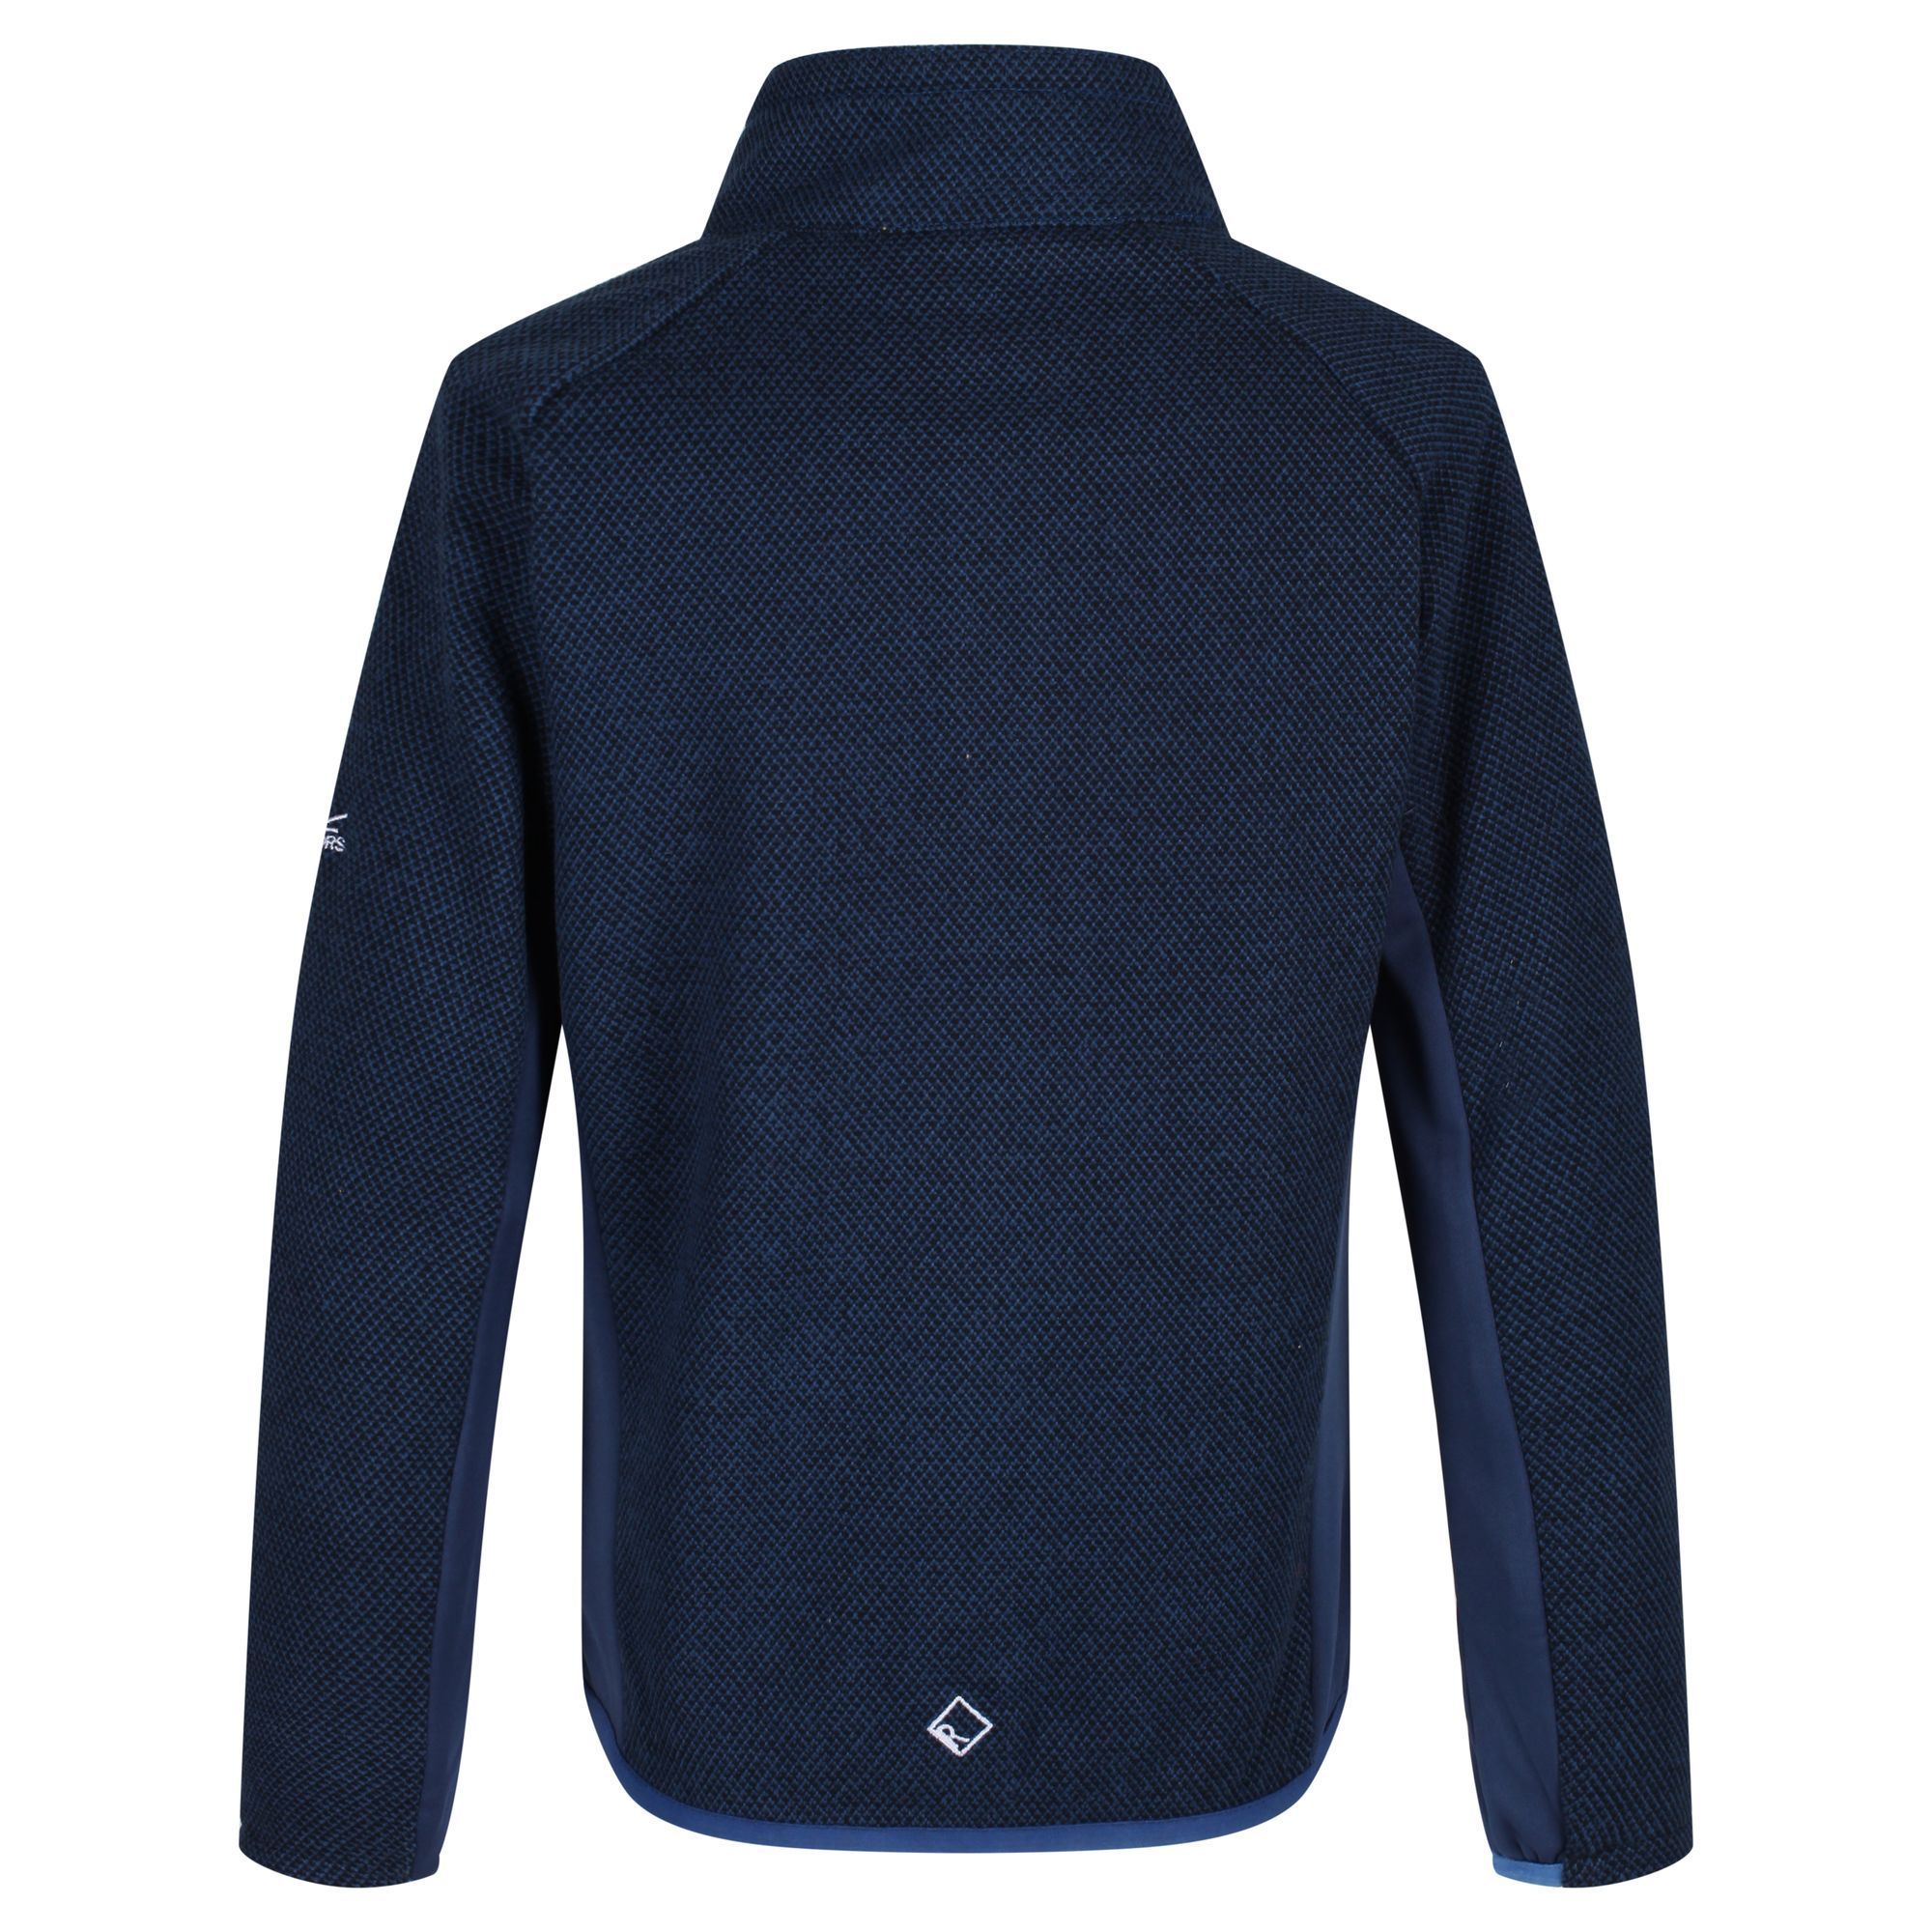 Material: 100% Polyester. Warm, stretchy, durable and water-resistant 235gsm two tone fleece jacket with Extol stretch side and underarm panels. Stretch binding to collar, cuffs and hem. 2 zipped lower pockets. Regatta `R` logo on the chest.